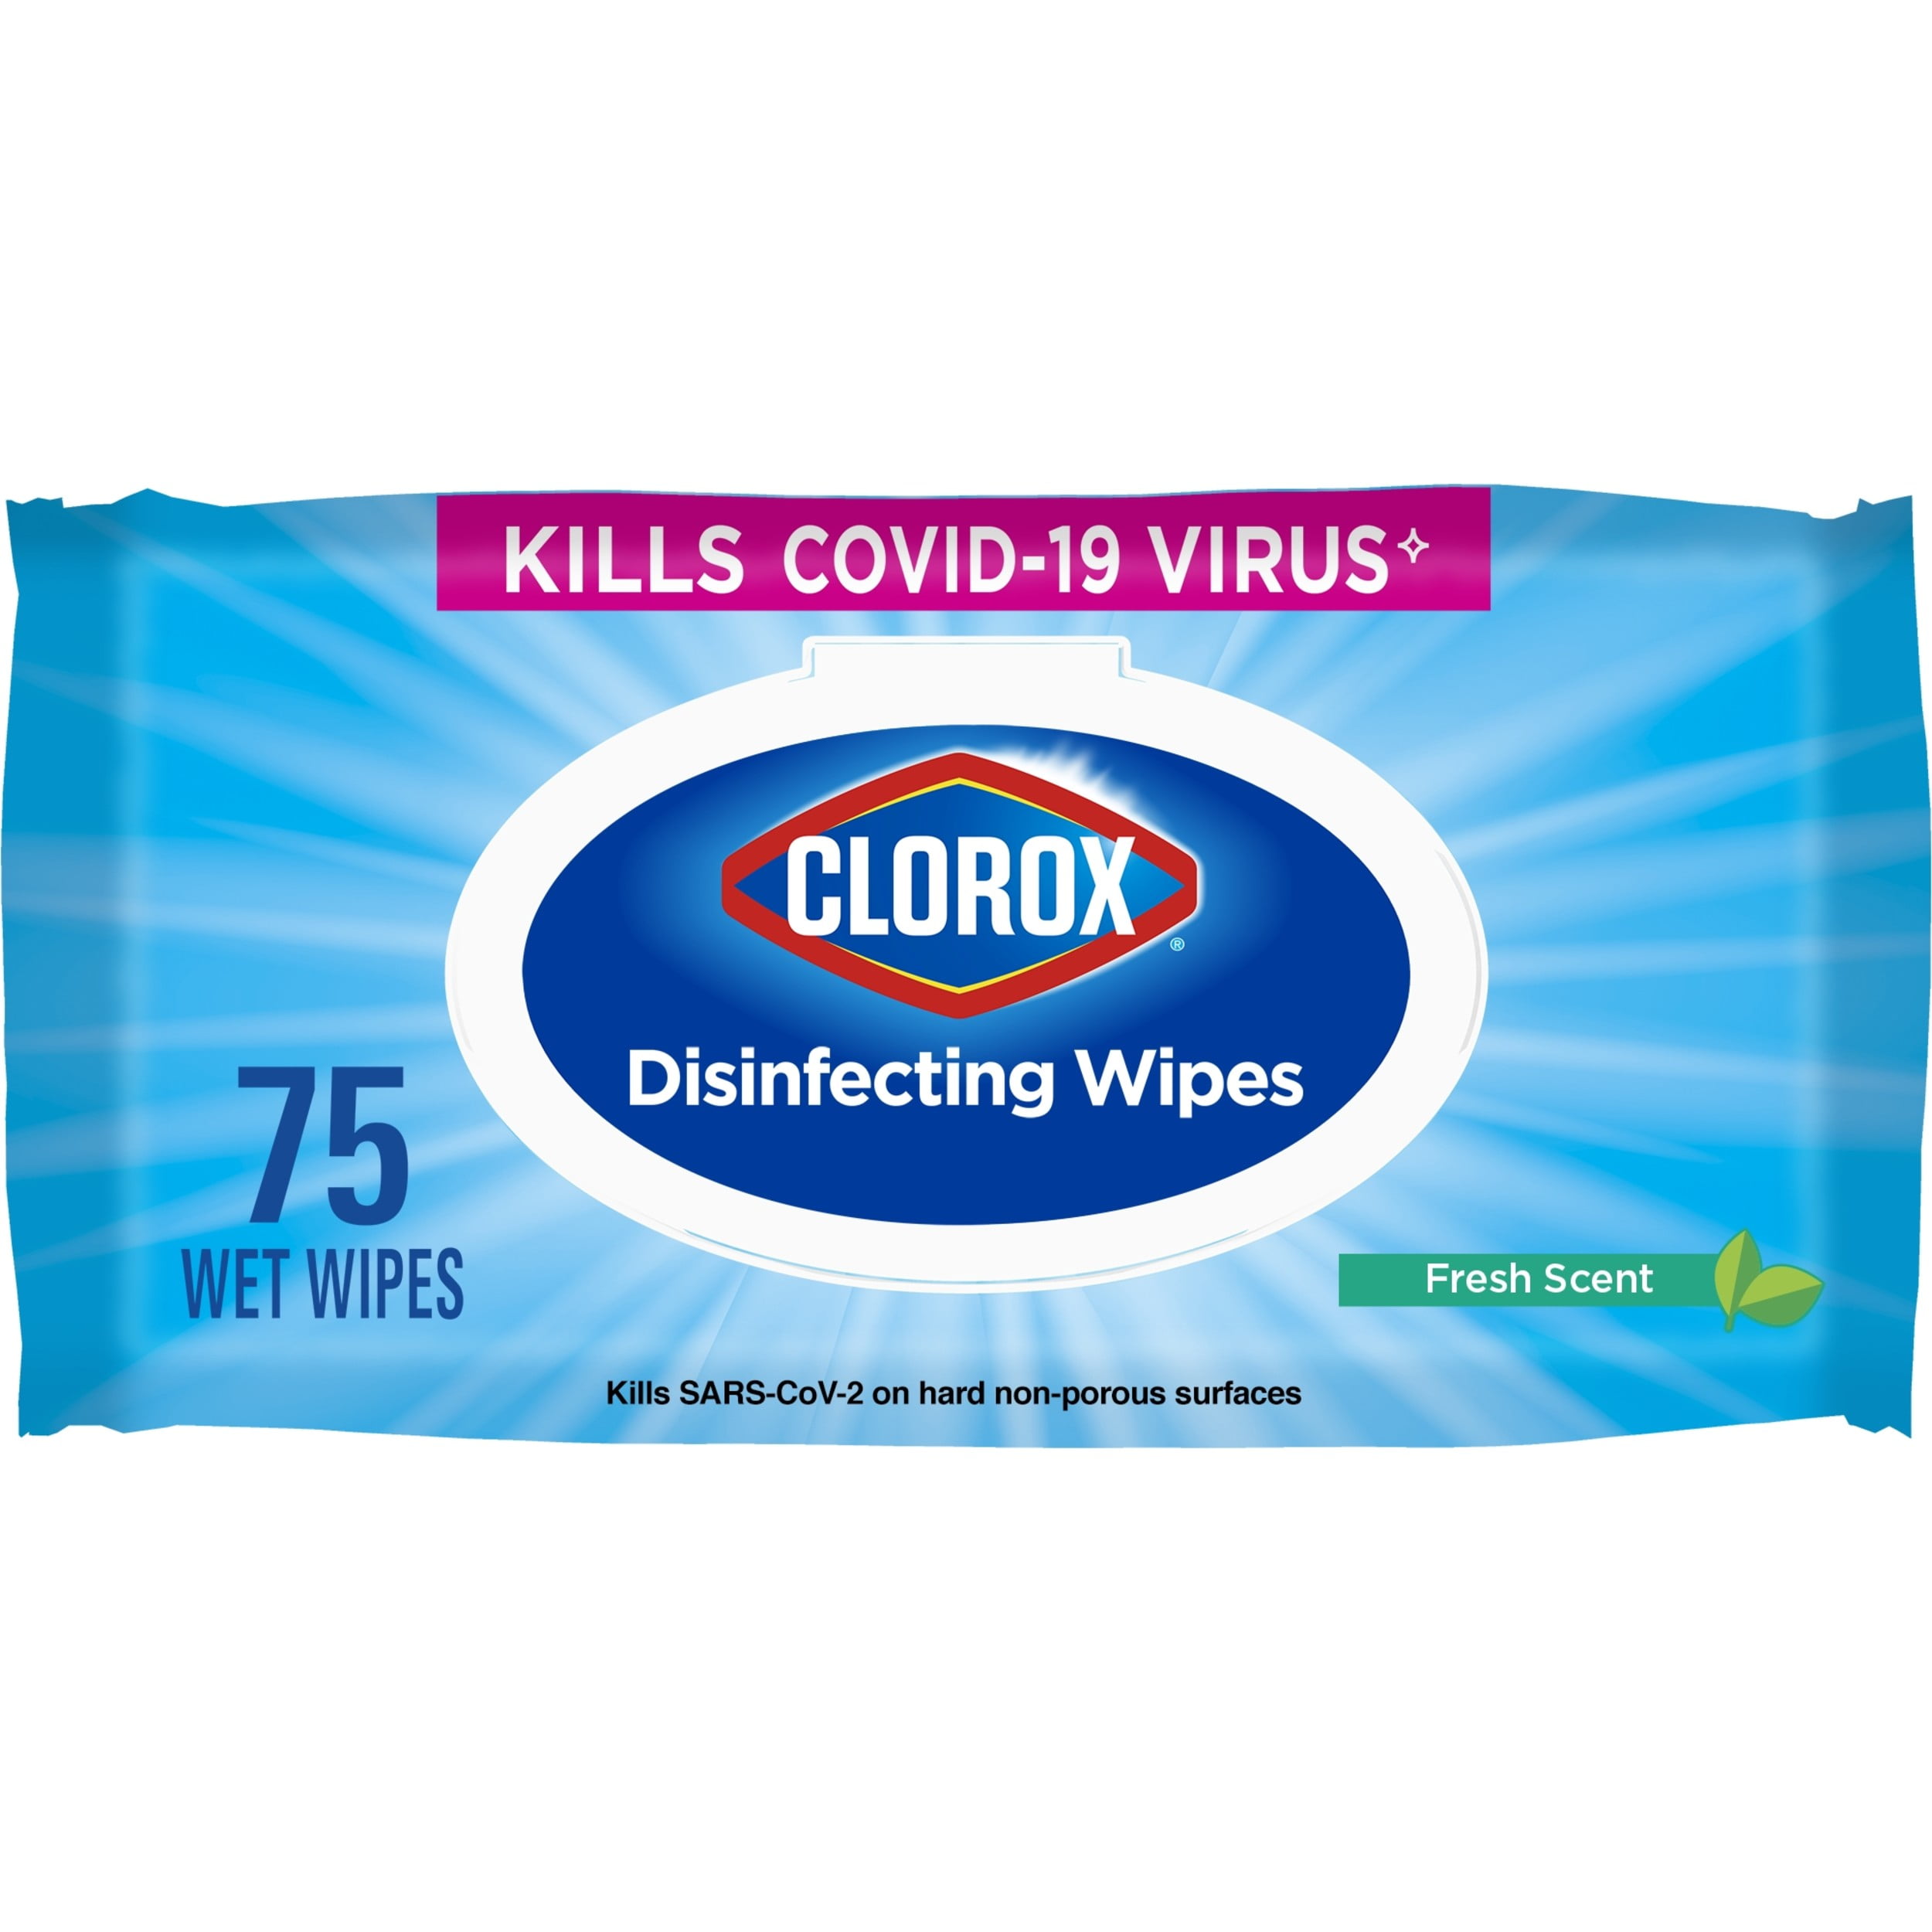 Clorox Fresh Scent Disinfecting Wipes - 75ct